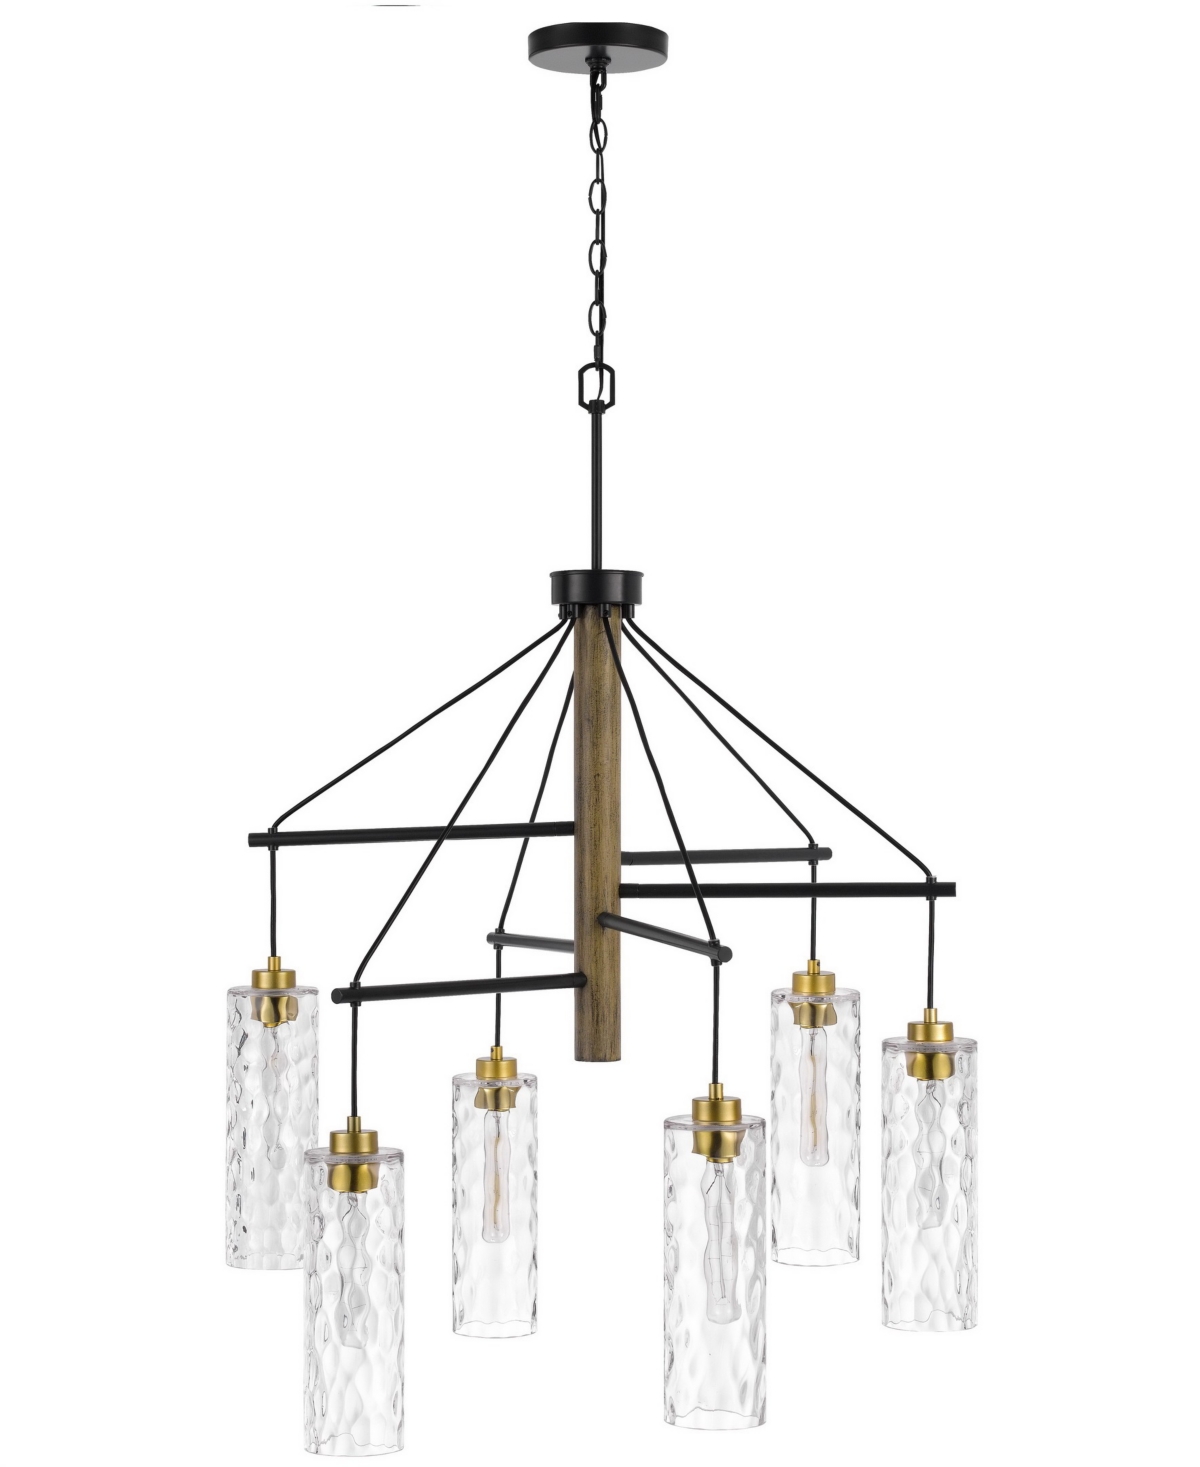 Cal Lighting 44" Height Metal And Wood Chandelier In Antique Brass,wood